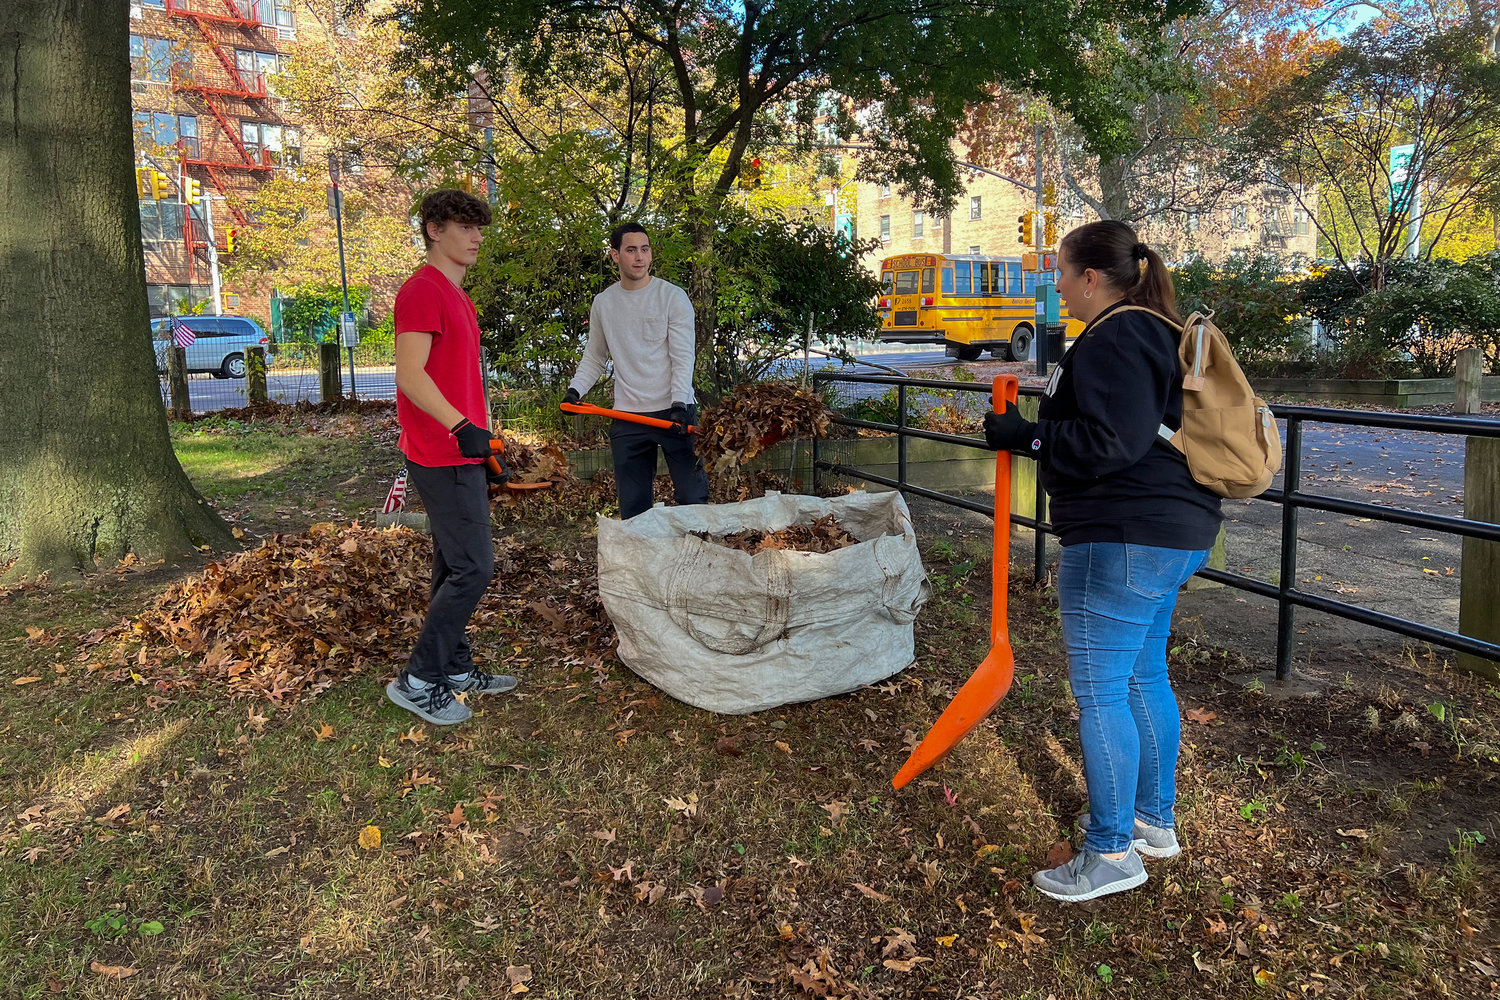 Members of the Manhattan College Student Veteran Organization and track team gather together Nov. 4 to collect leaves at Van Cortlandt Park’s Memorial Grove, a living memorial for fallen Bronx soldiers.